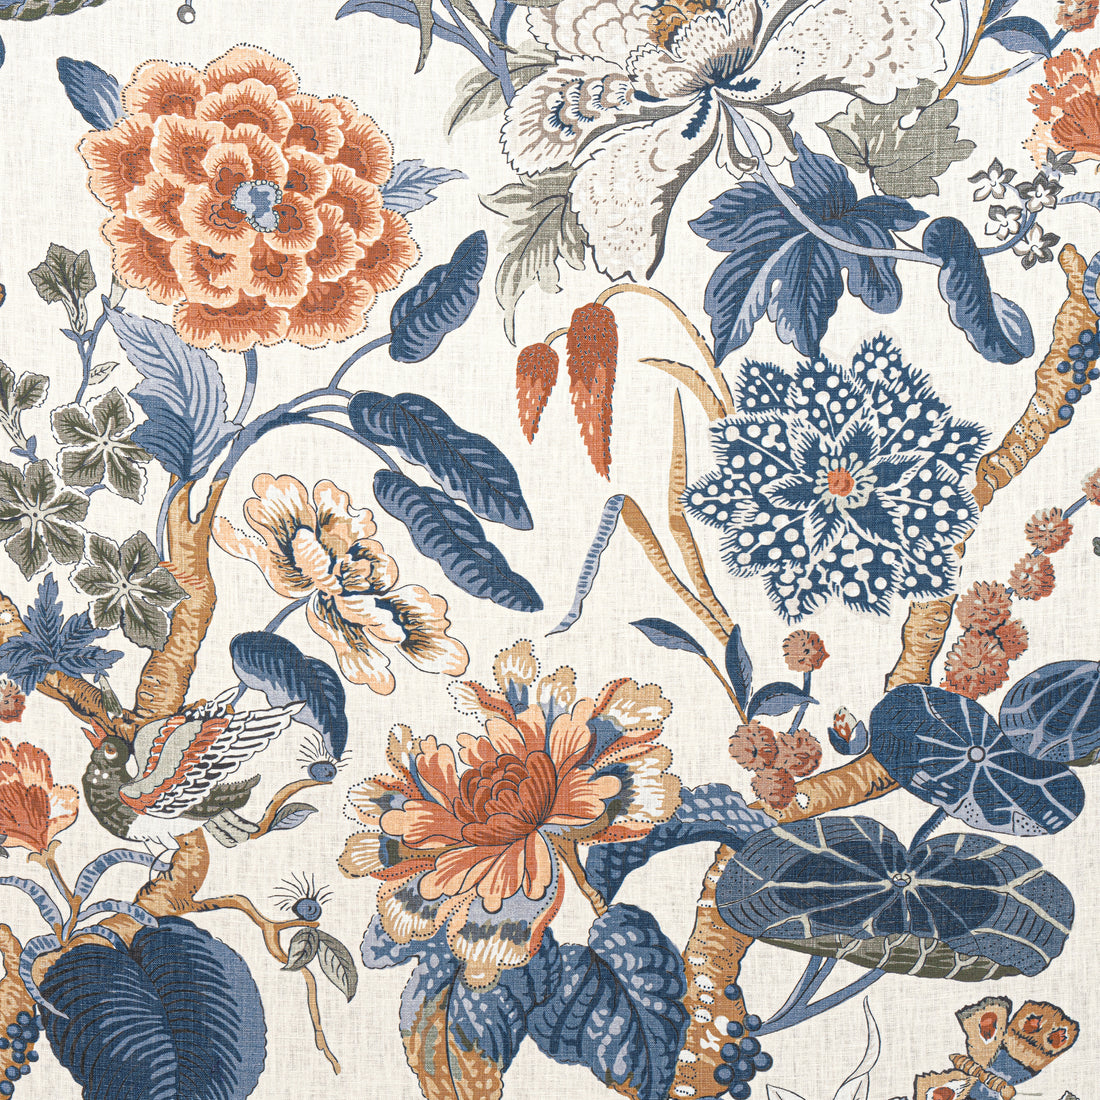 Hill Garden fabric in brick and navy - pattern number F913655 - by Thibaut in the Grand Palace collection